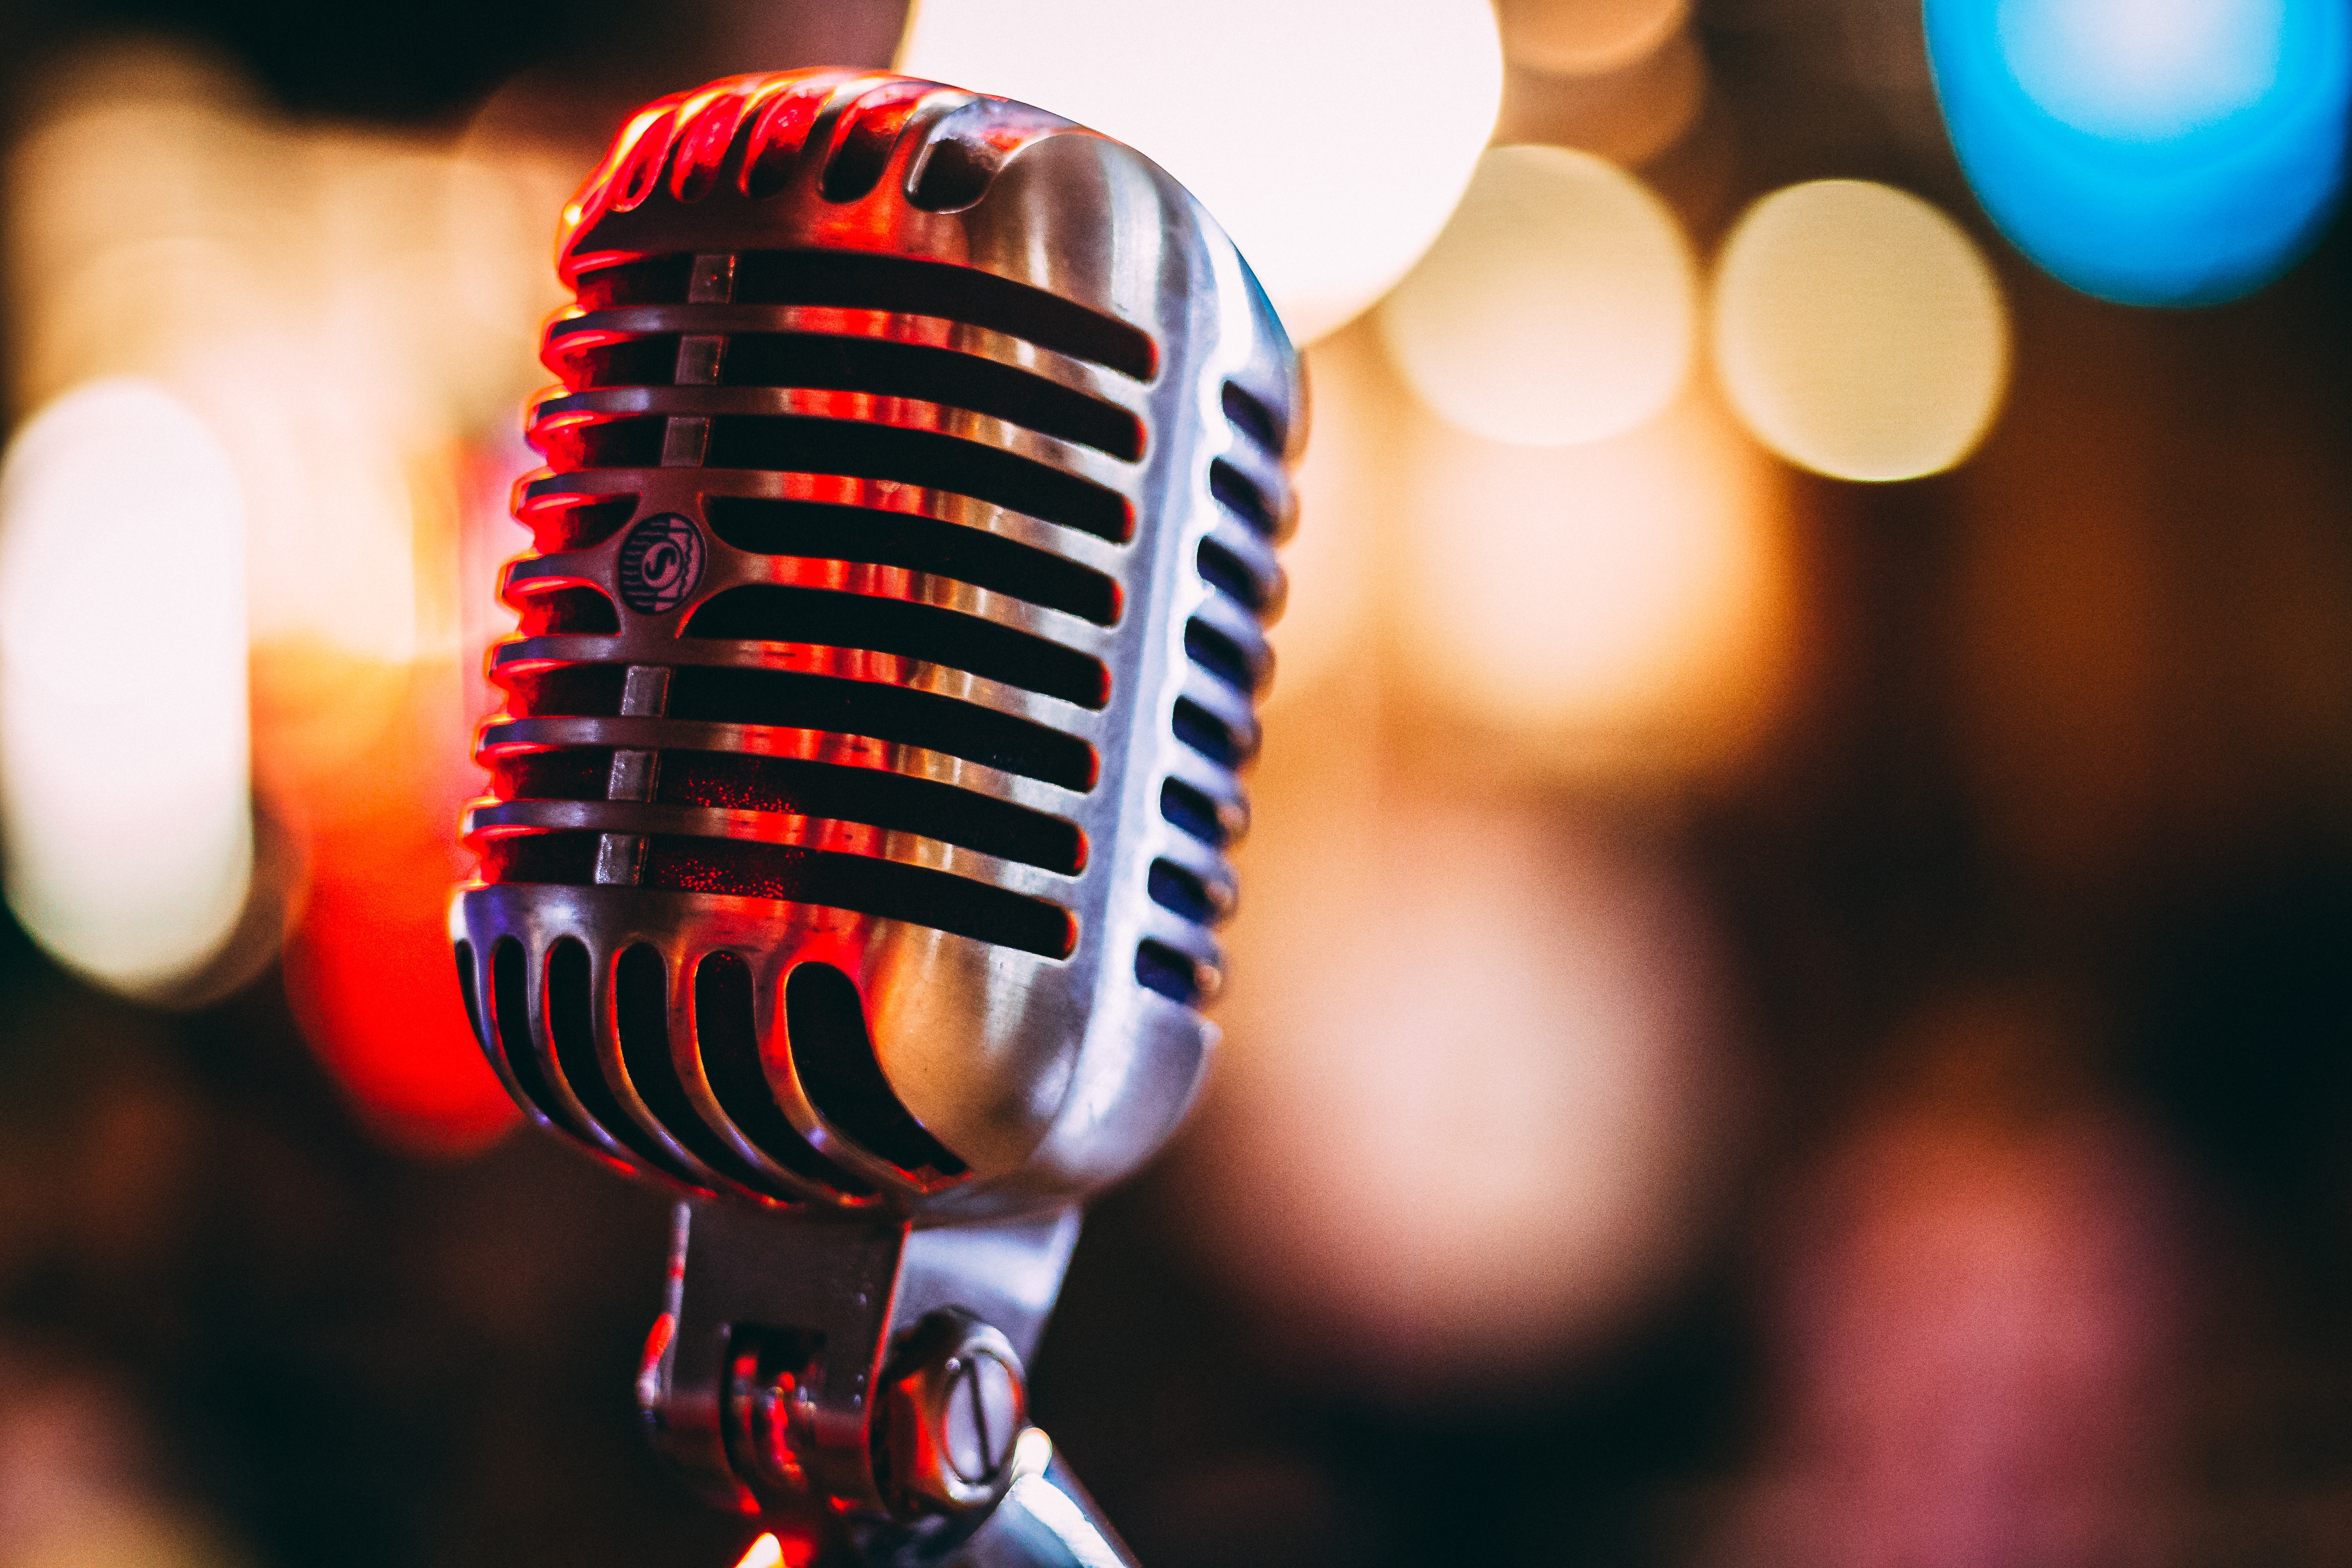 From Studio to Stage - How to Turn your Podcast Listeners into Event Attendees